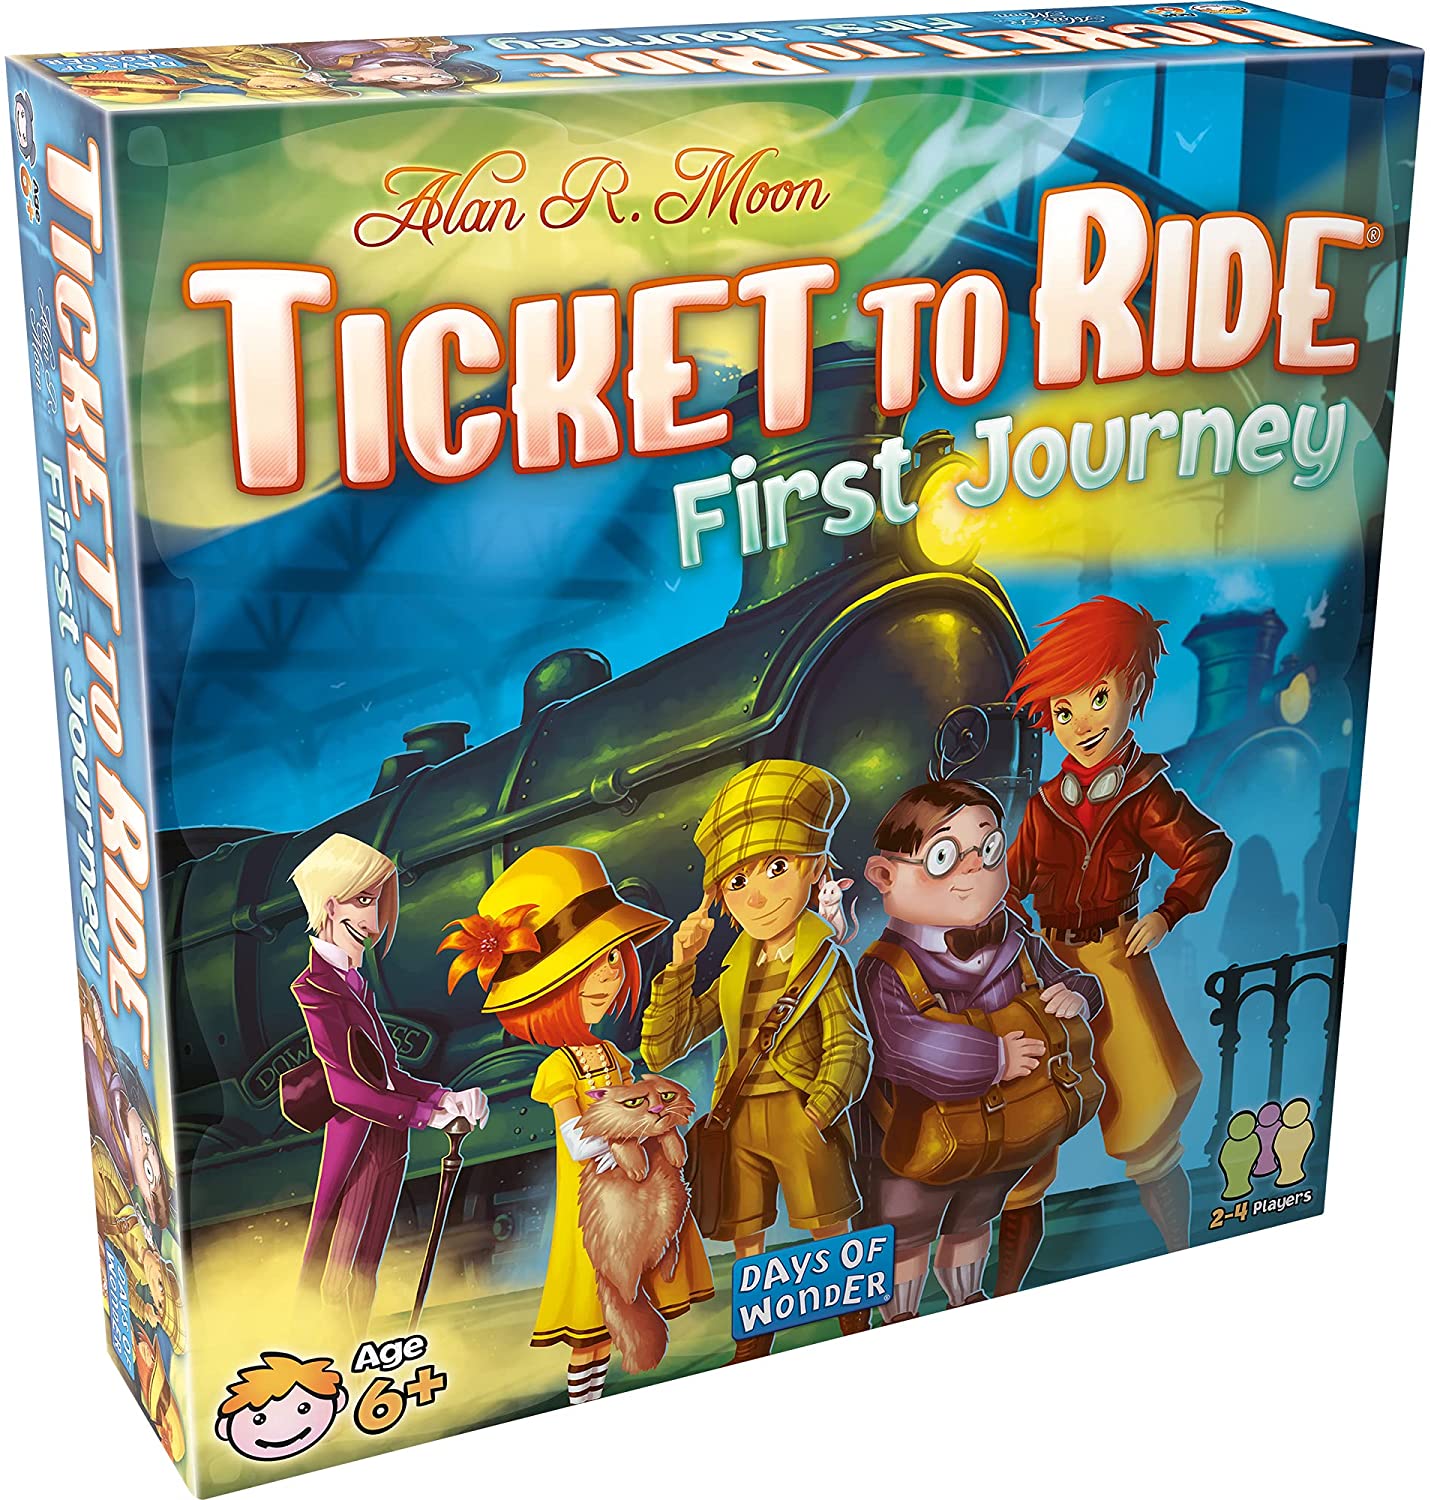 ticket to ride first